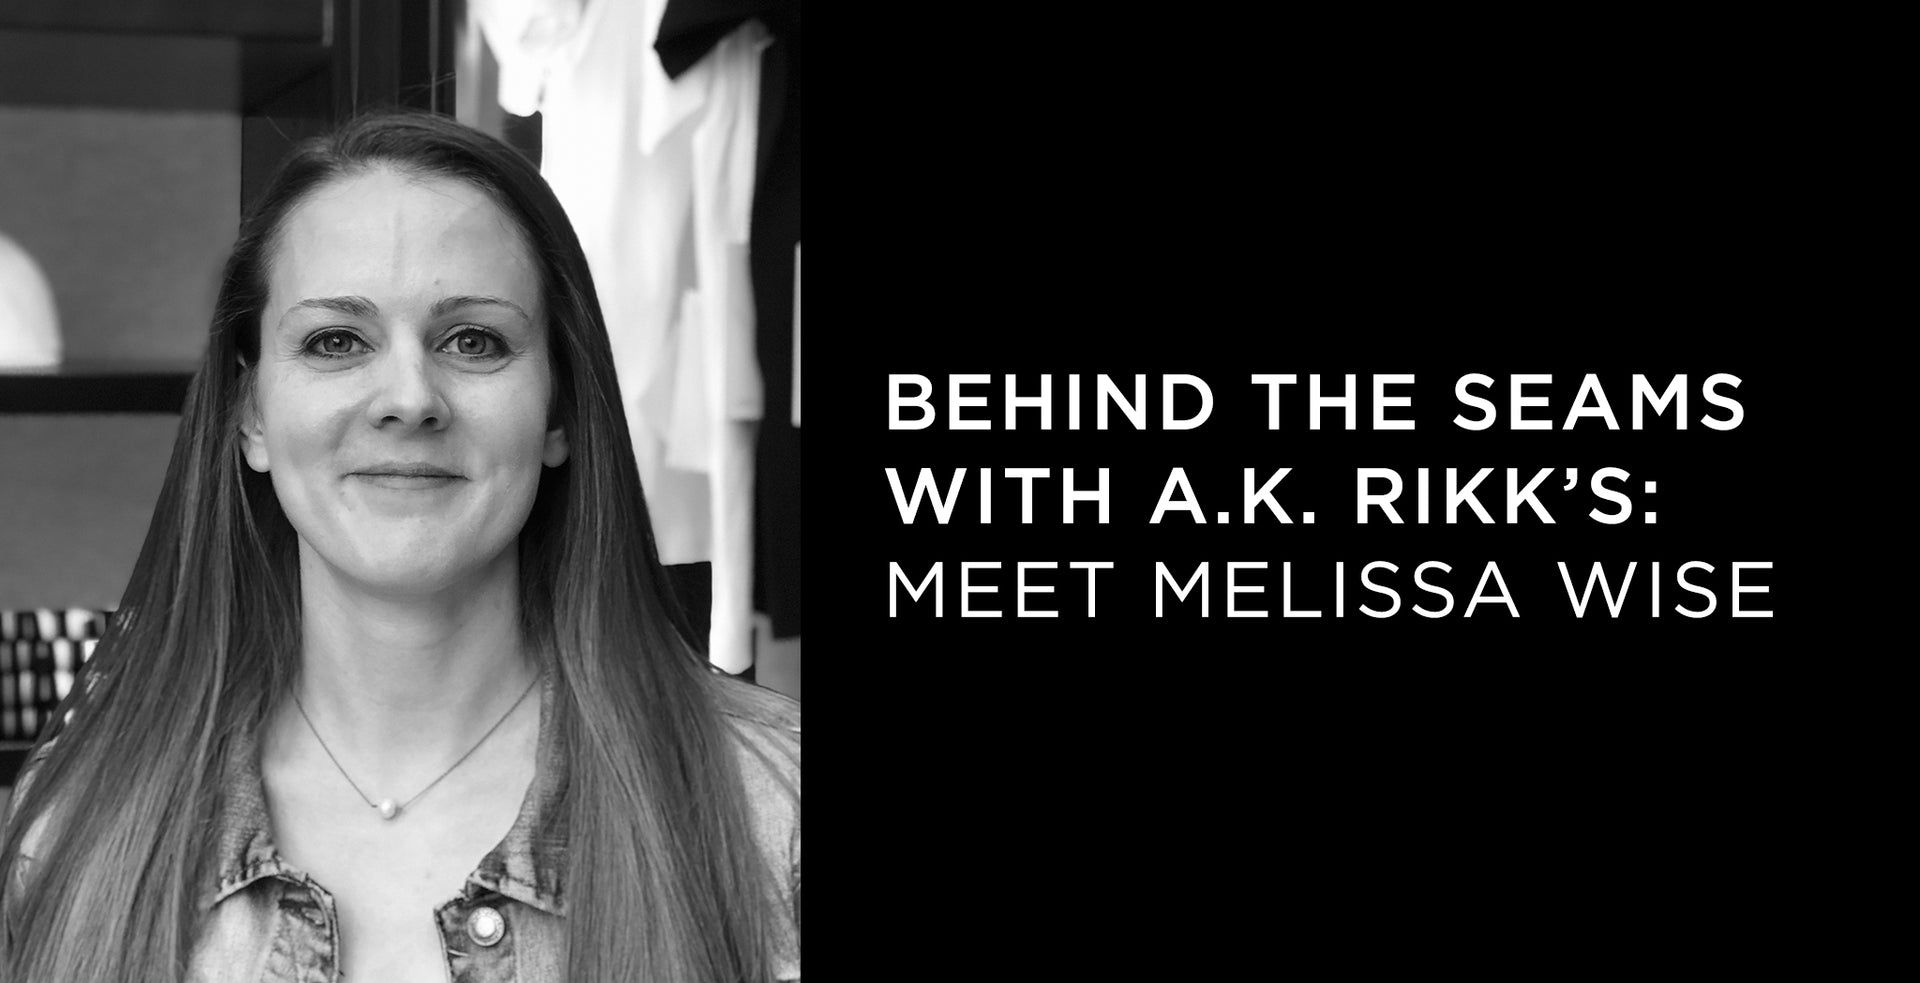 Behind the Seams with A.K. Rikk's: Meet Melissa Wise